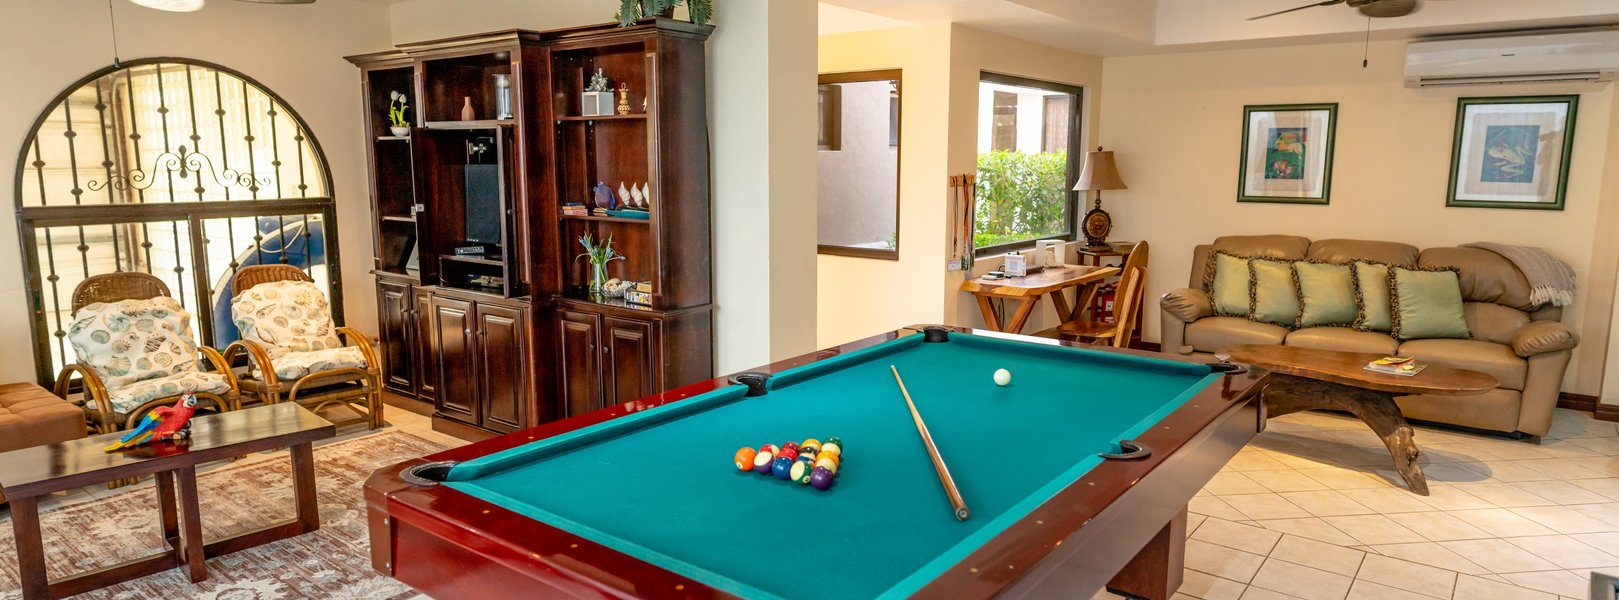 pool-table-and-entertainment-area